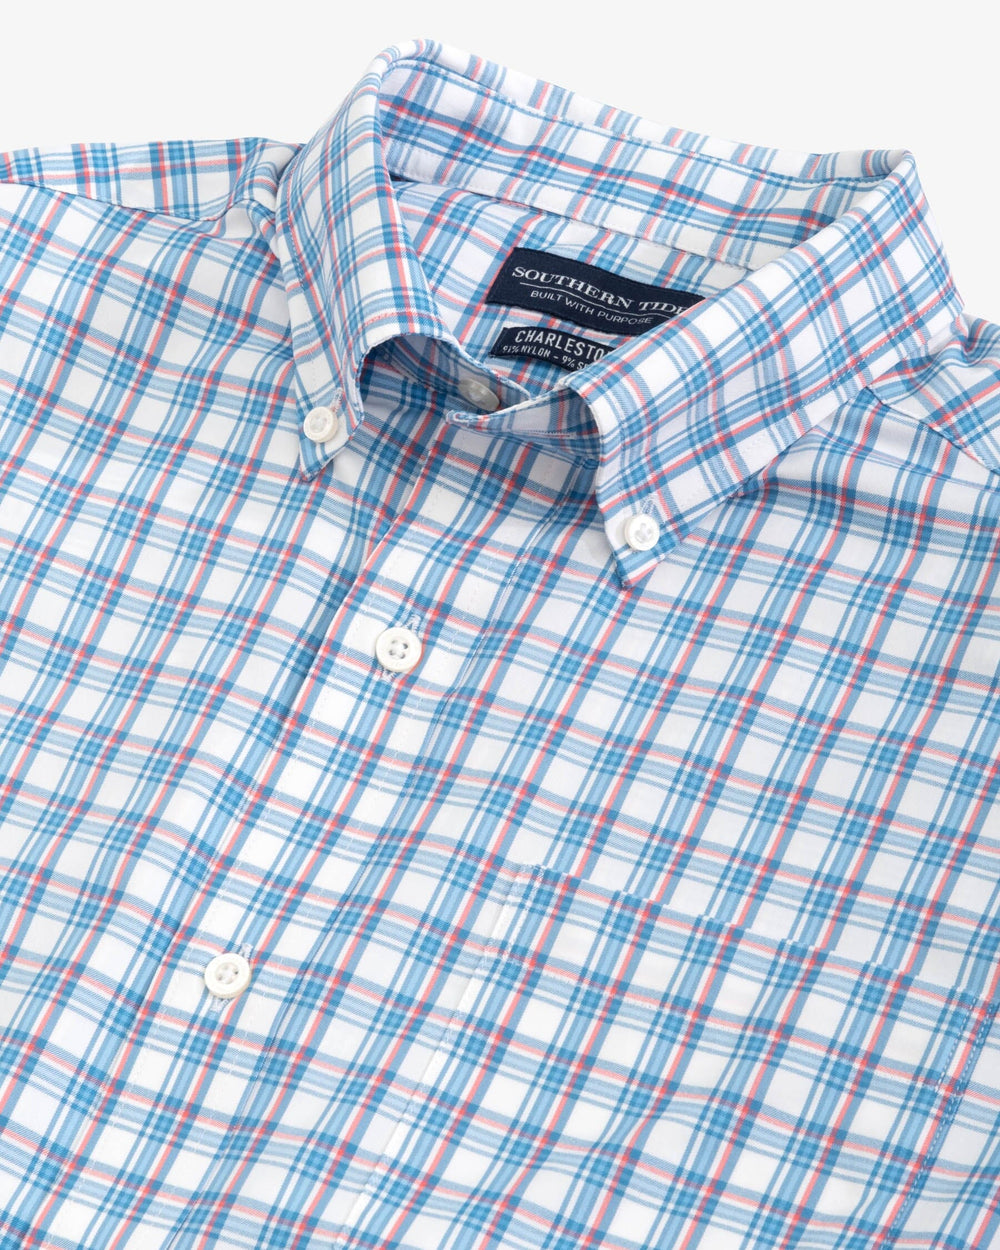 The detail view of the Southern Tide brrr Charleston Intercoastal Ashmore Plaid Long Sleeve Button Down Sport shirt by Southern Tide - Classic White